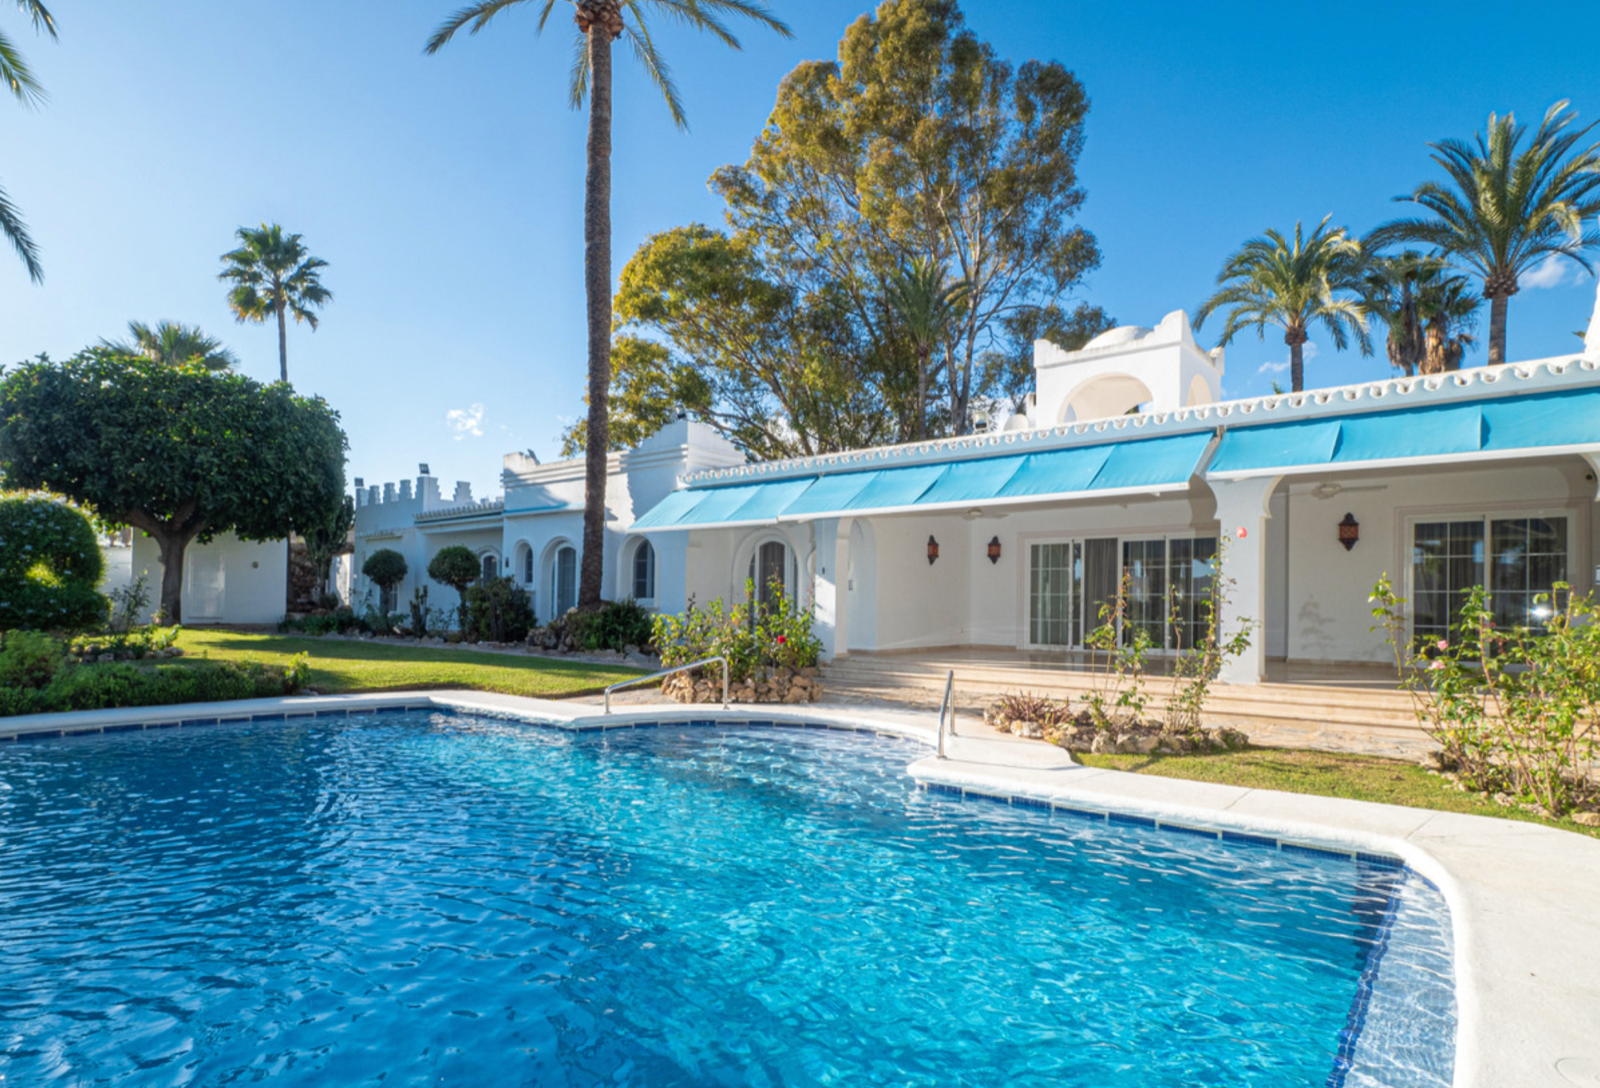 Impressive south facing villa on an extensive, private and secluded plot in the heart of El Paraiso